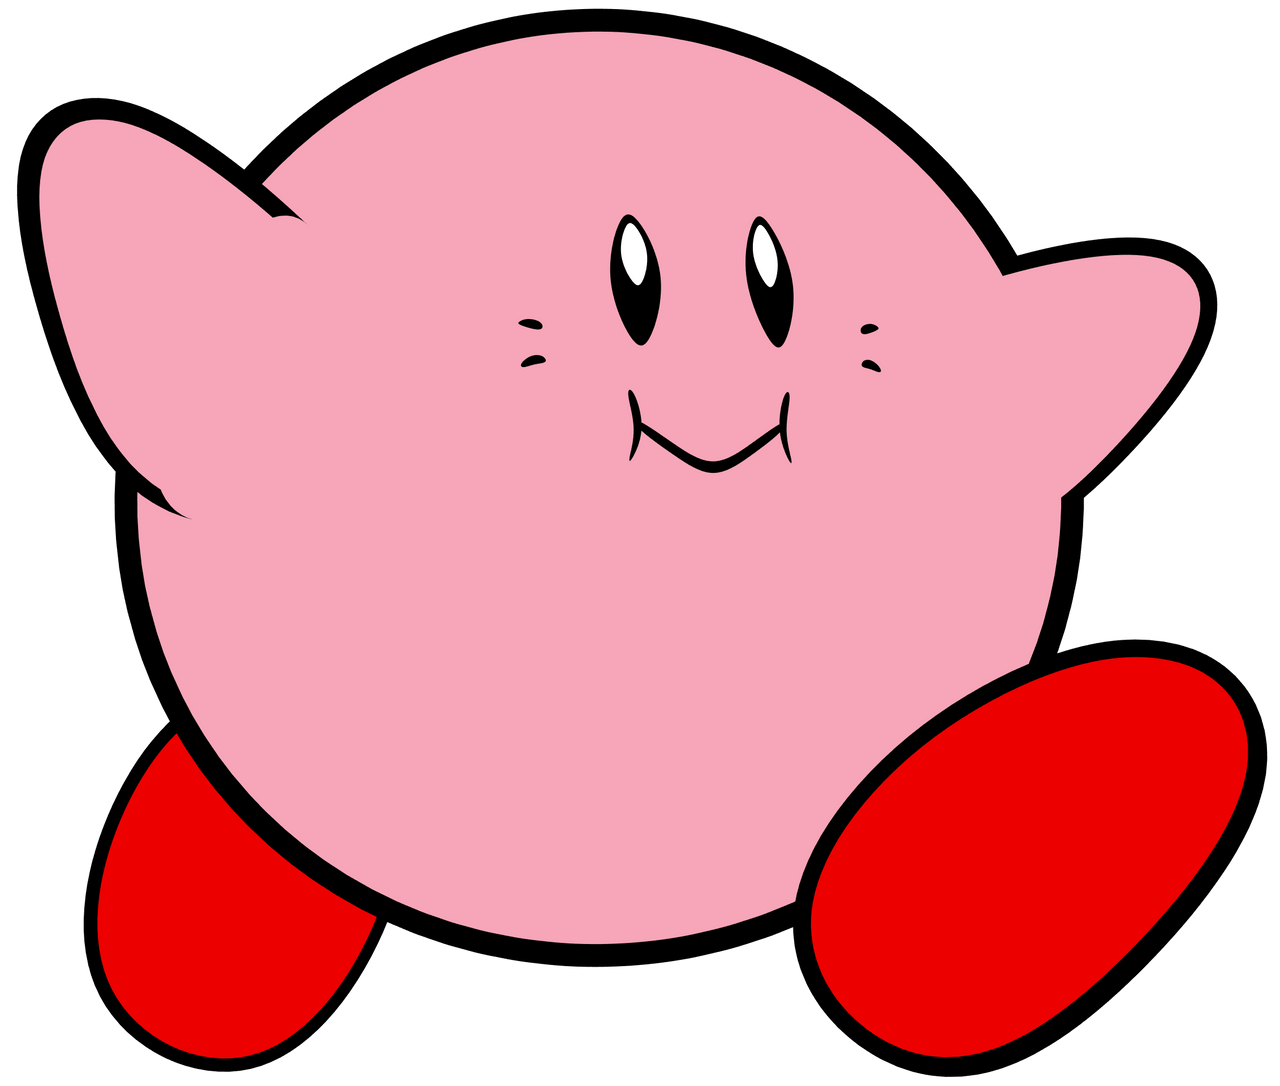 Classic Kirby 3D model by MilesGamesDA on DeviantArt